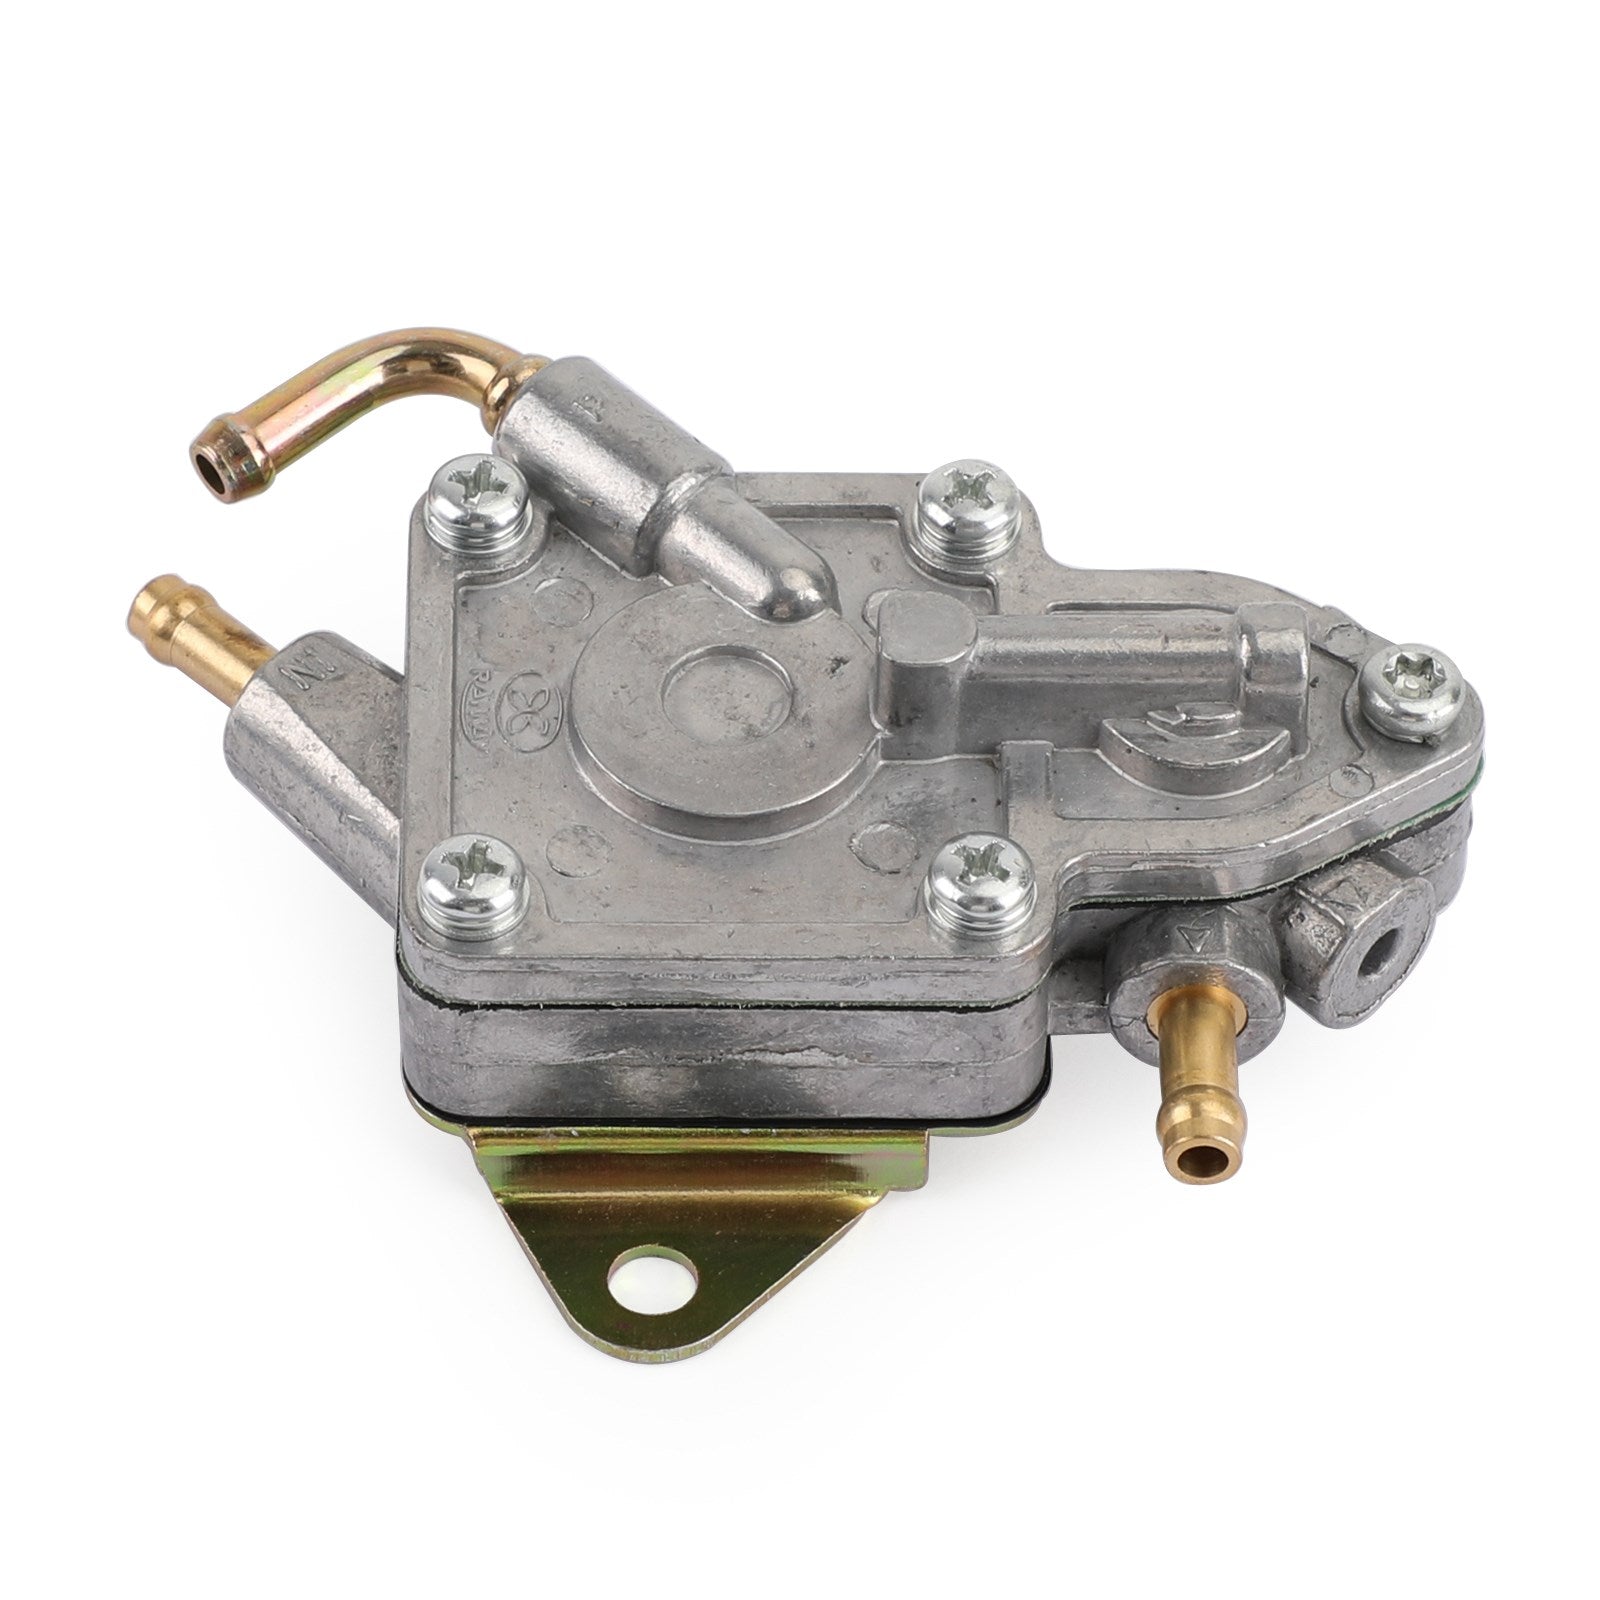 Fuel Pump Assembly Fit for Yamaha Majesty YP250 95-99 4HC-13910-00 4HC-13910-10 Generic